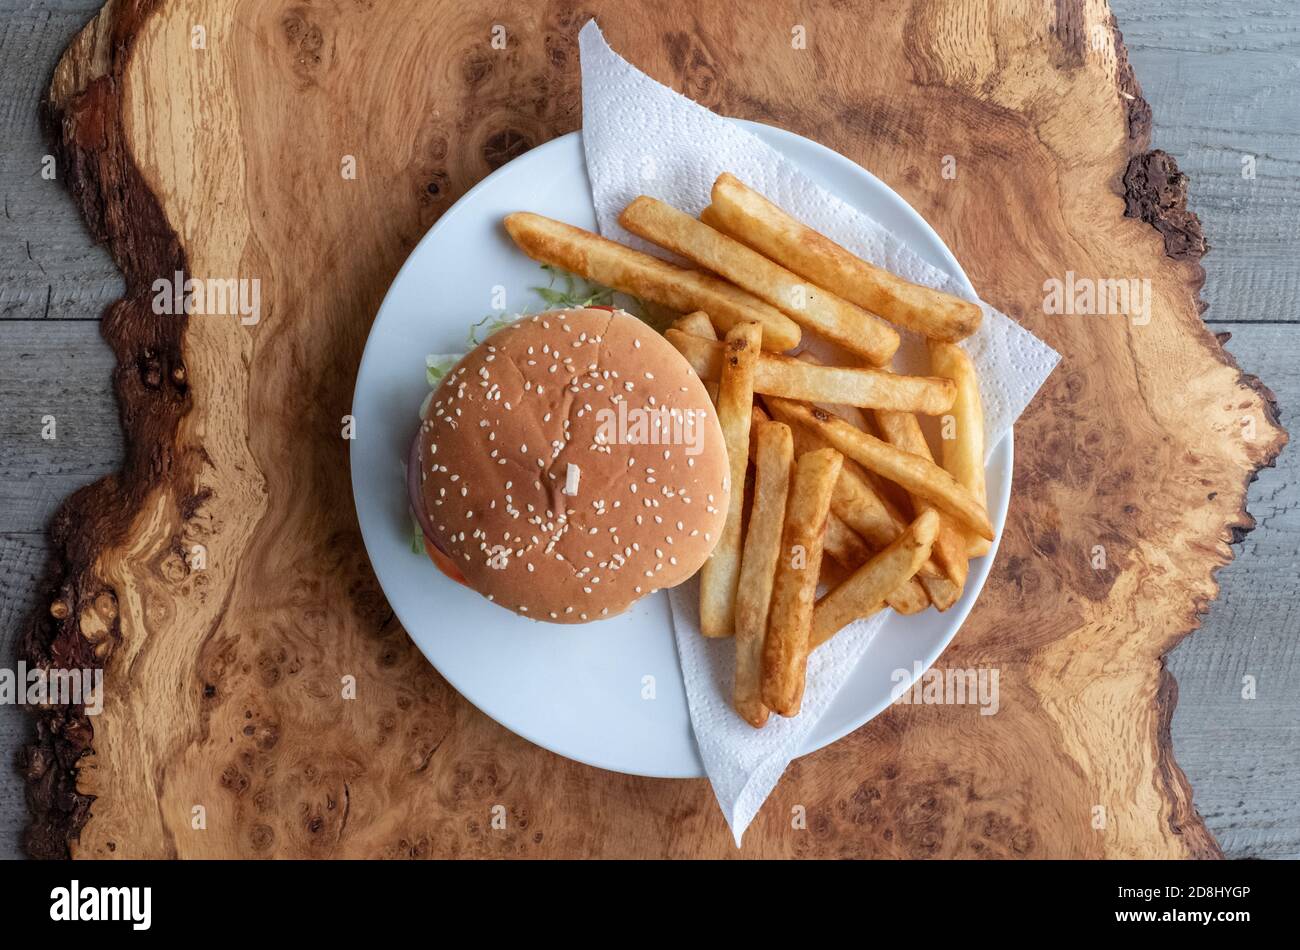 Vegan veggie soya burger in bun with salad and relish, and chips on the side. Stock Photo